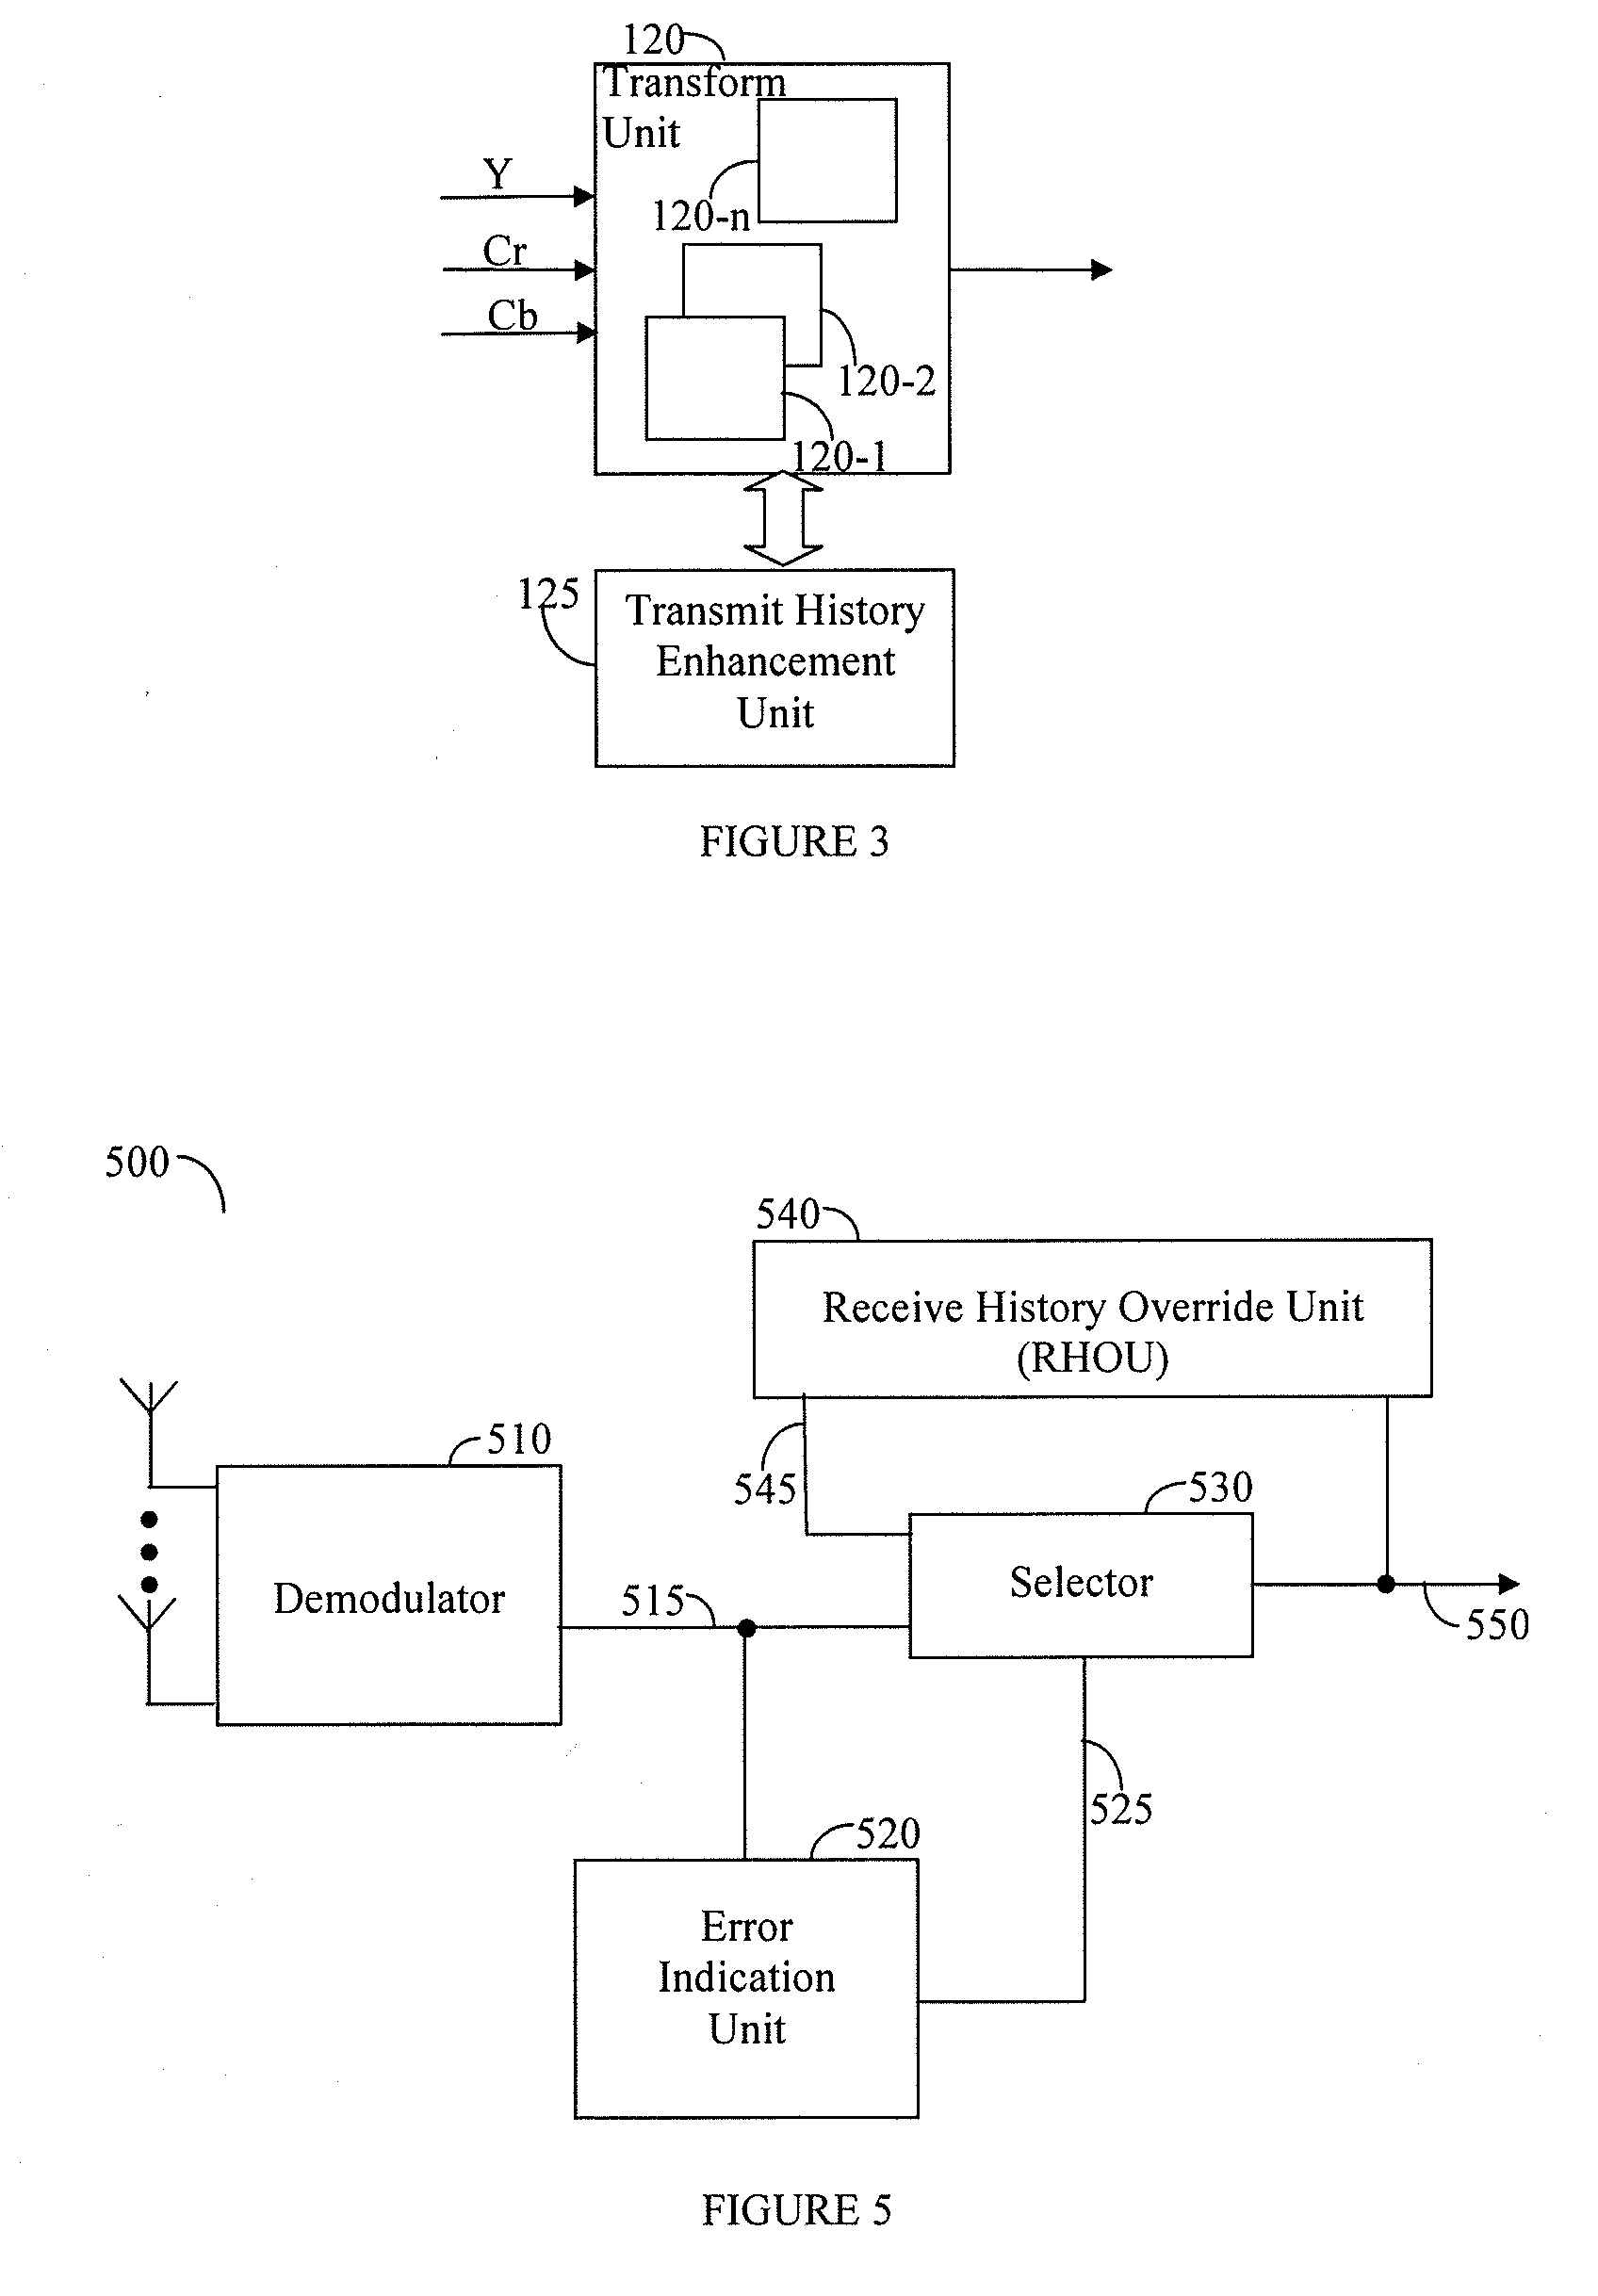 Apparatus for enhanced wireless transmission and reception of uncompressed video